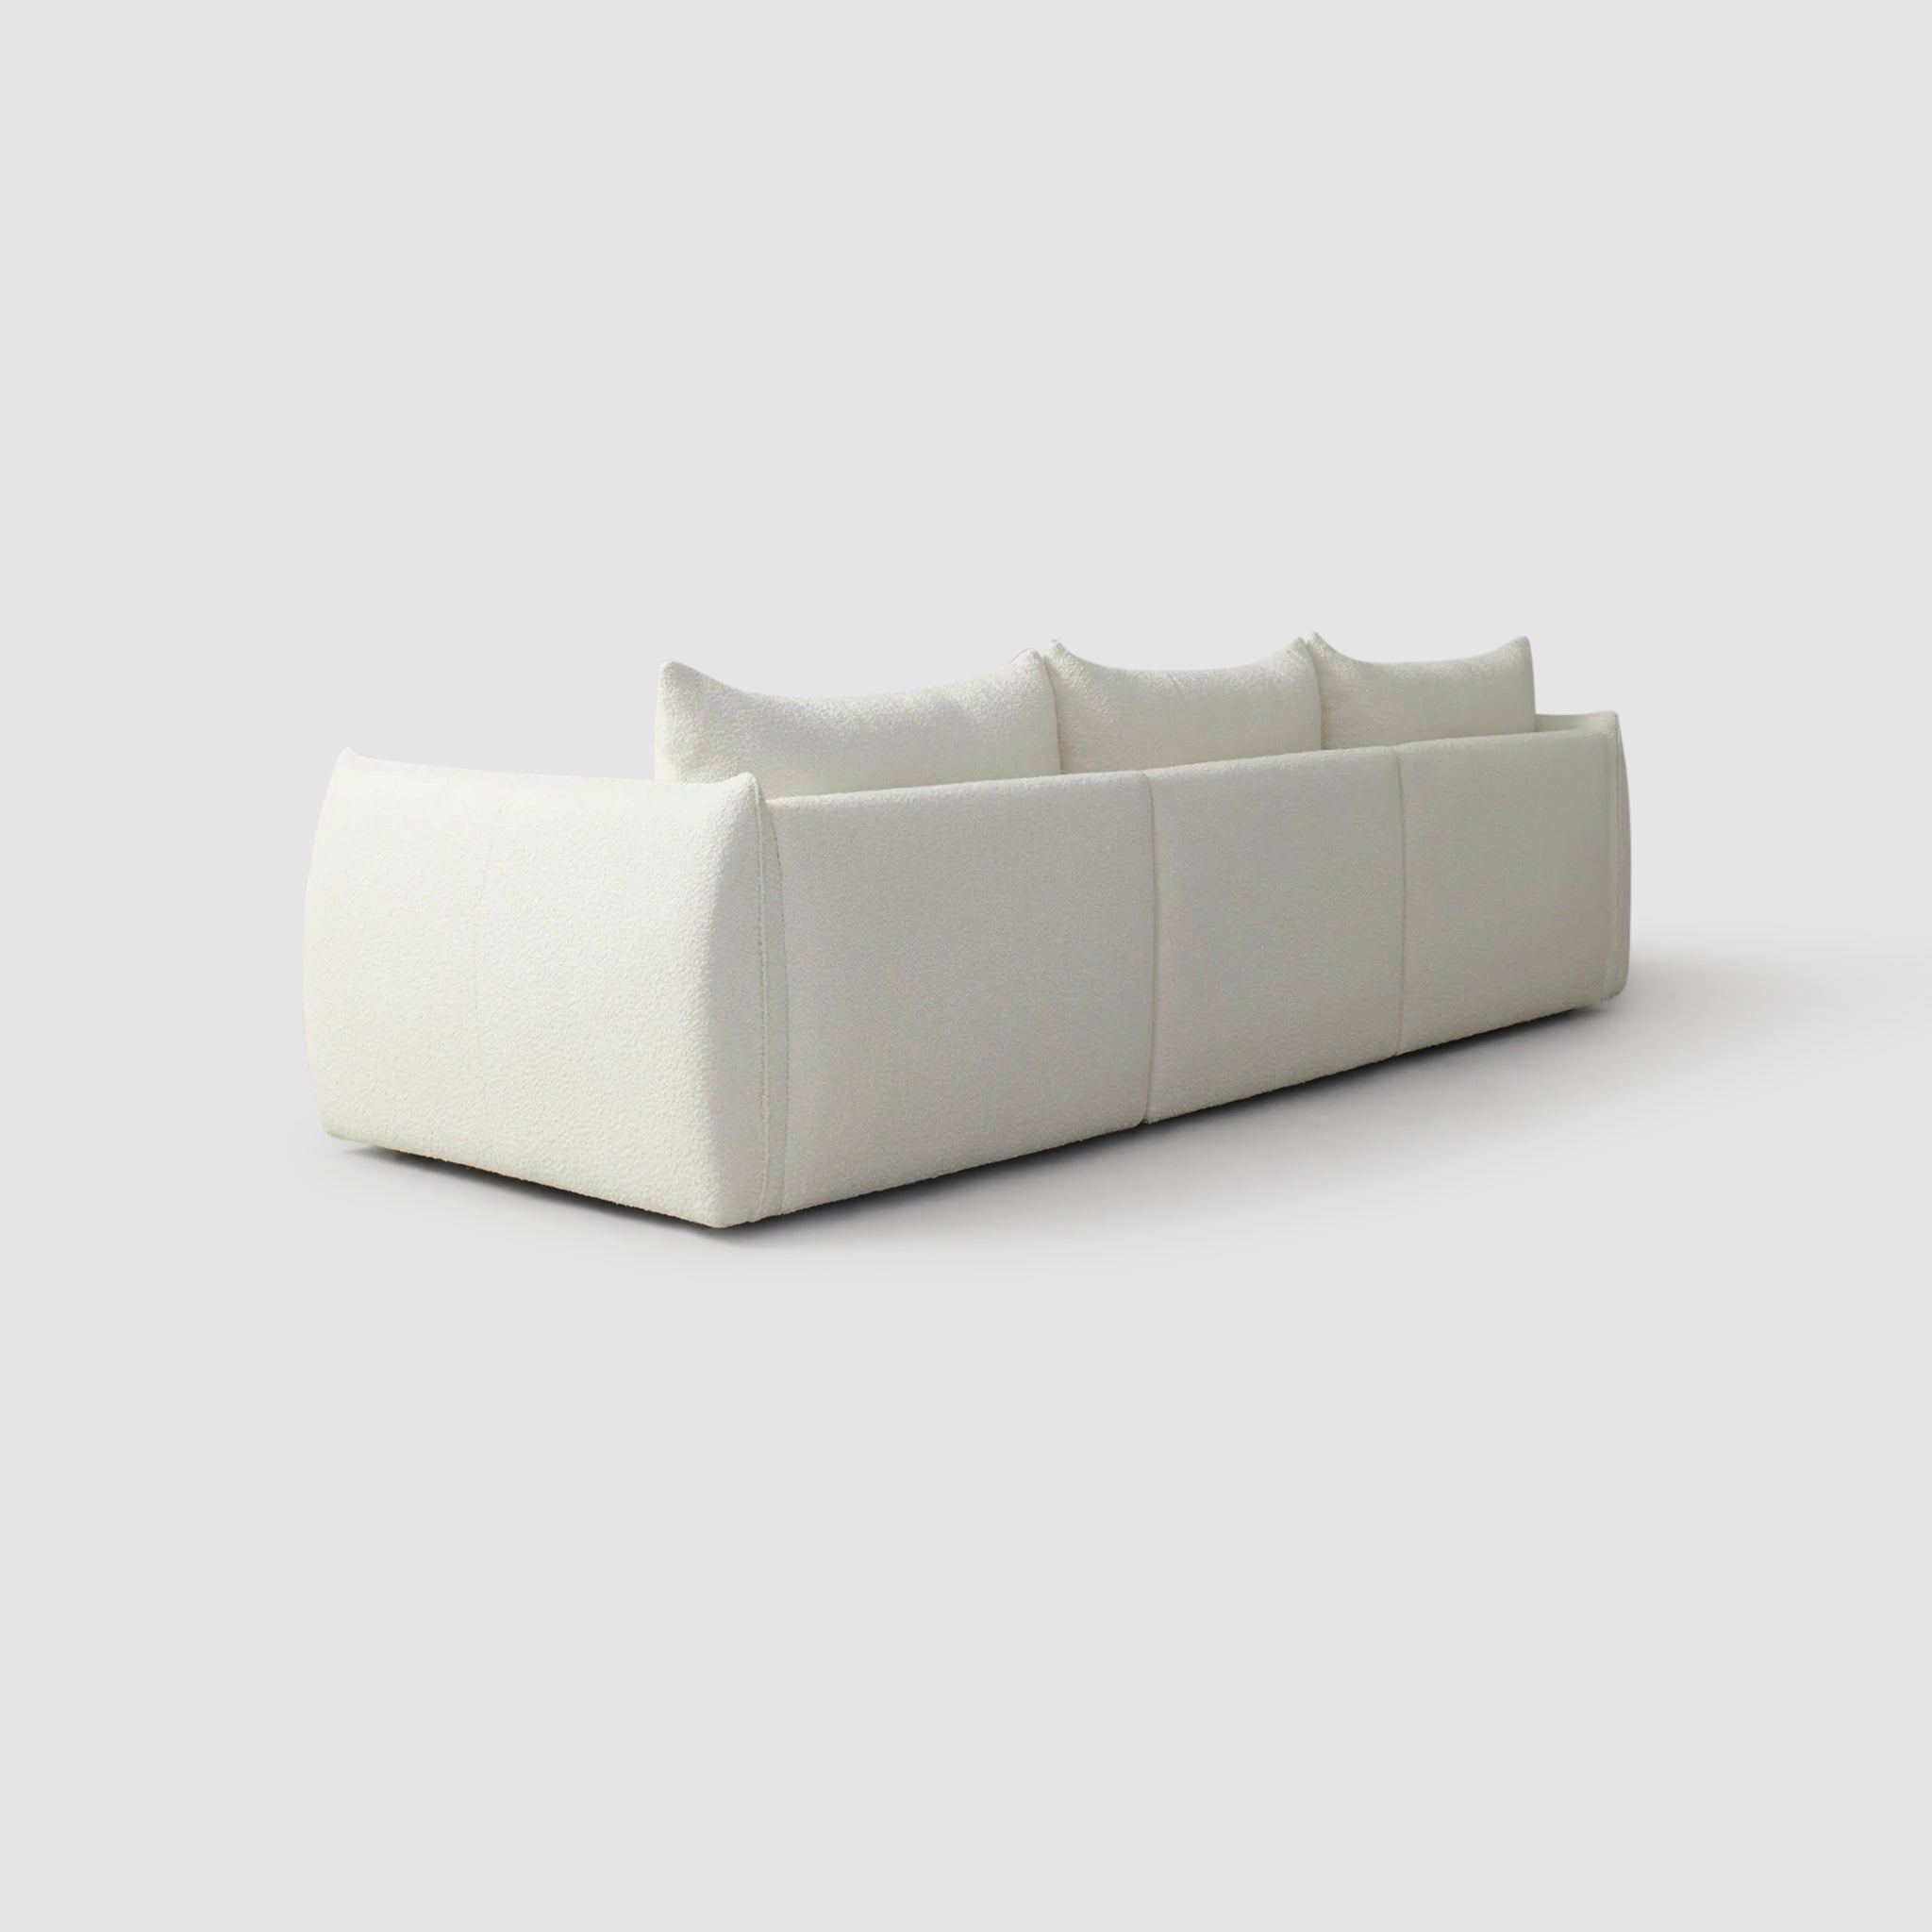 Back view of The Jules Sofa showcasing its clean lines